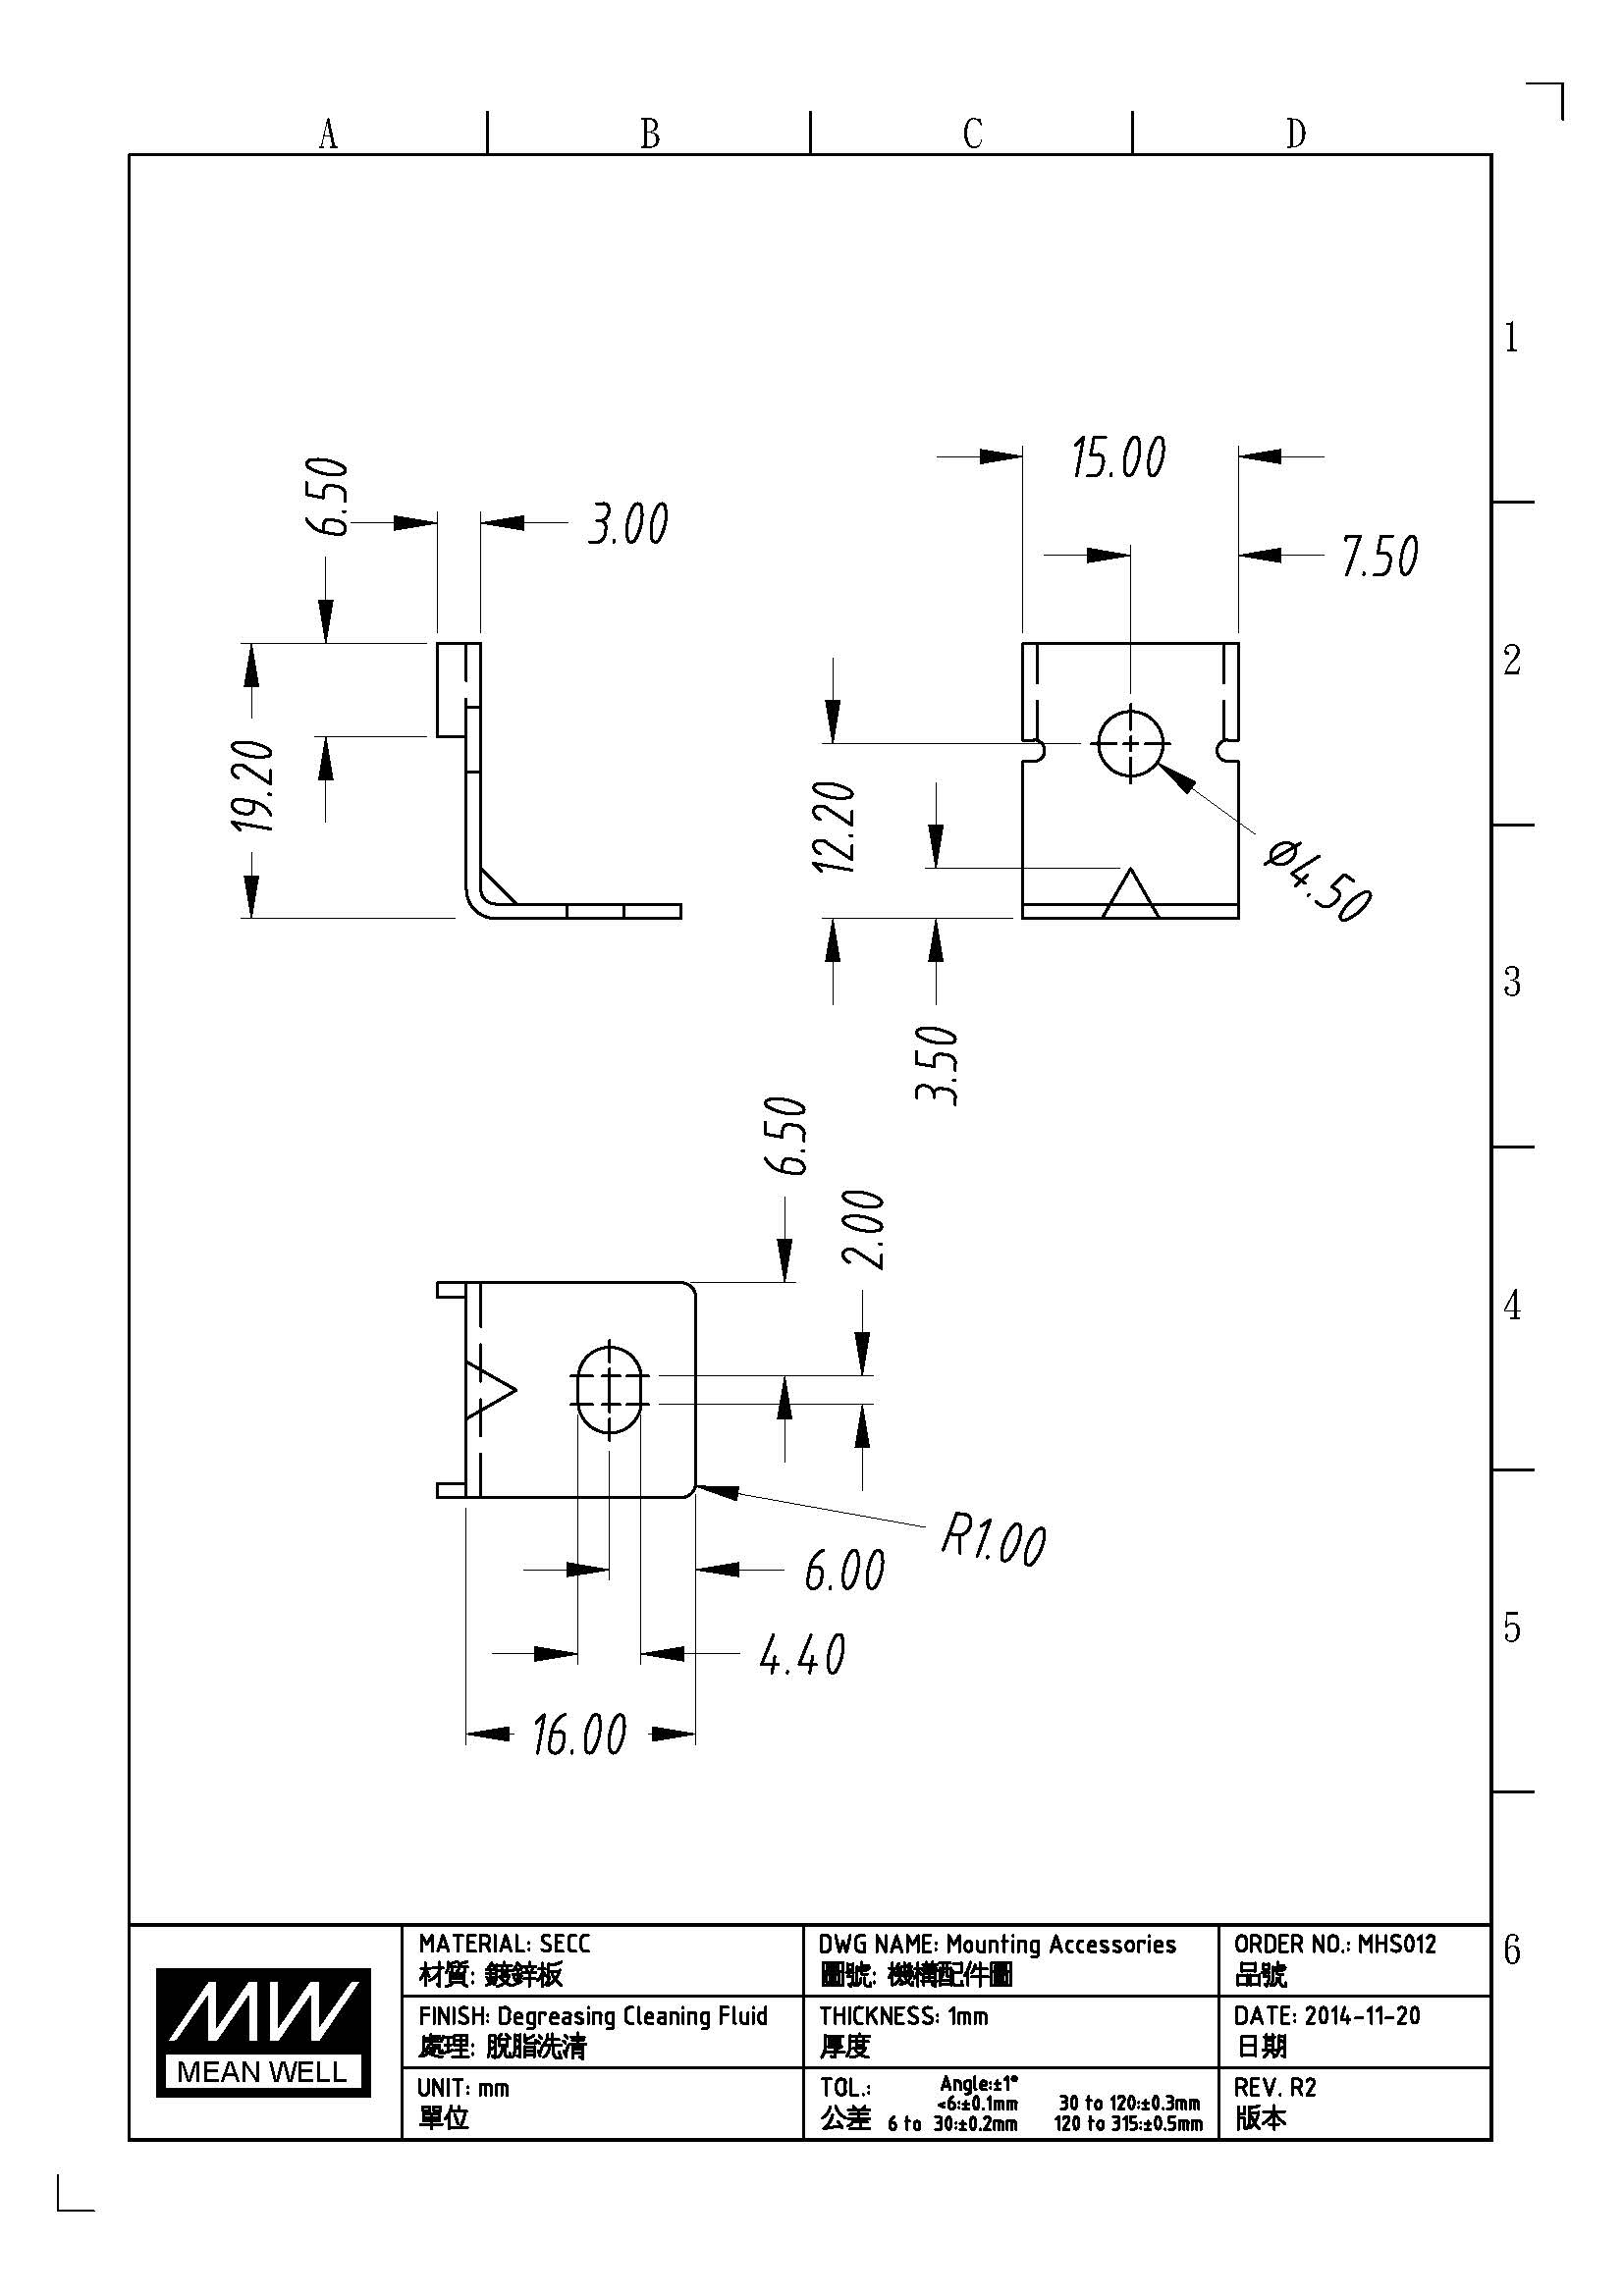 Mean Well Mounting Accessories MHS012 - Mounting Hardware Diagram Graphic